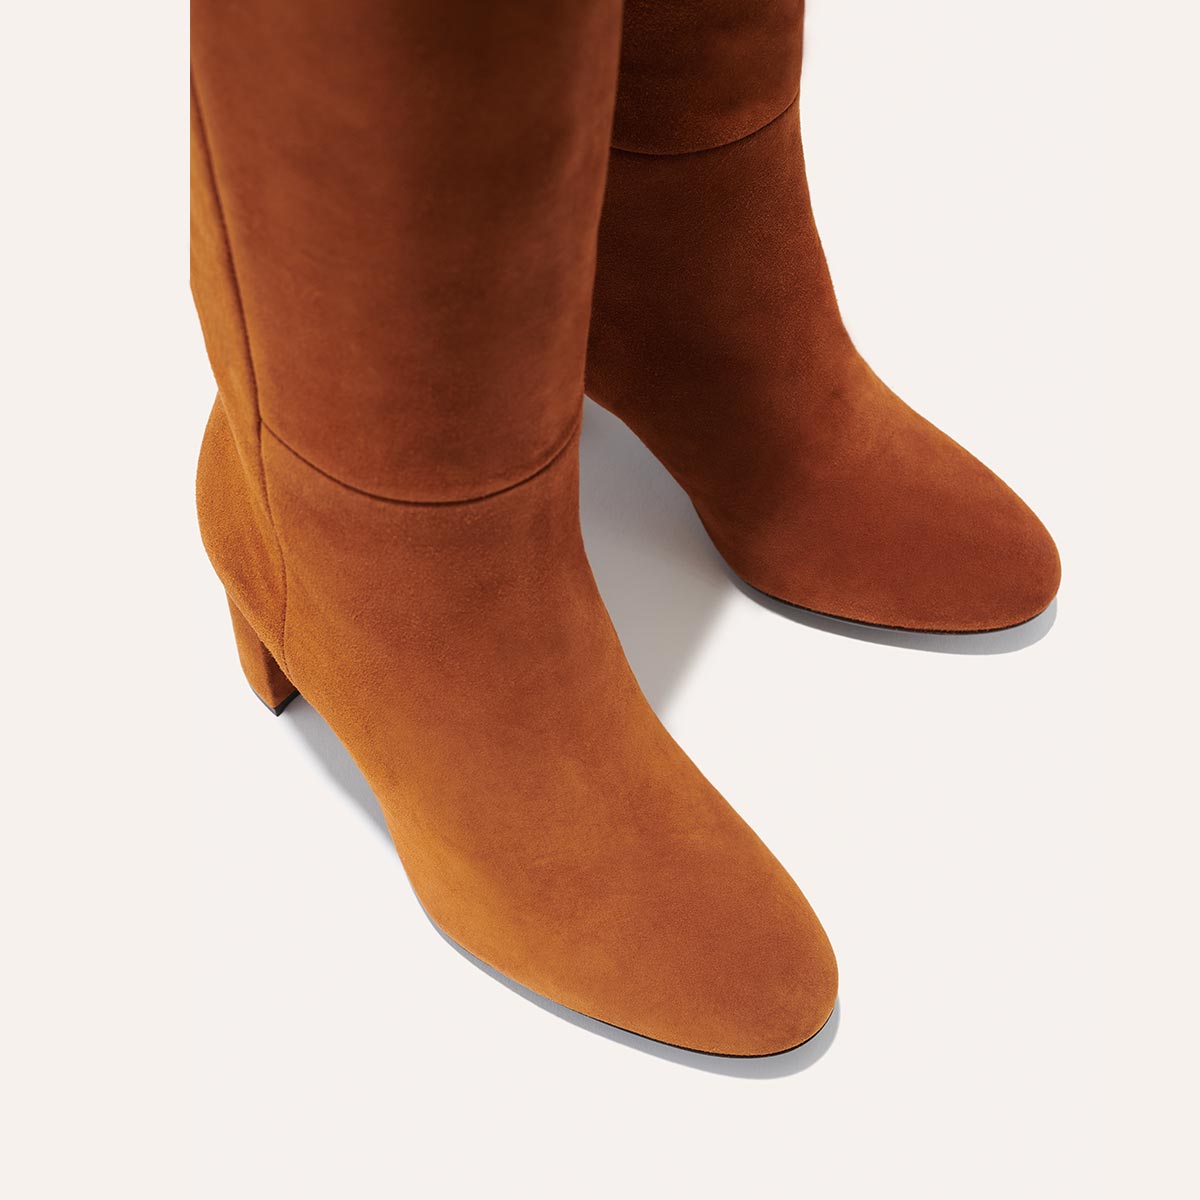 The Bleecker Boot - Tawny Suede